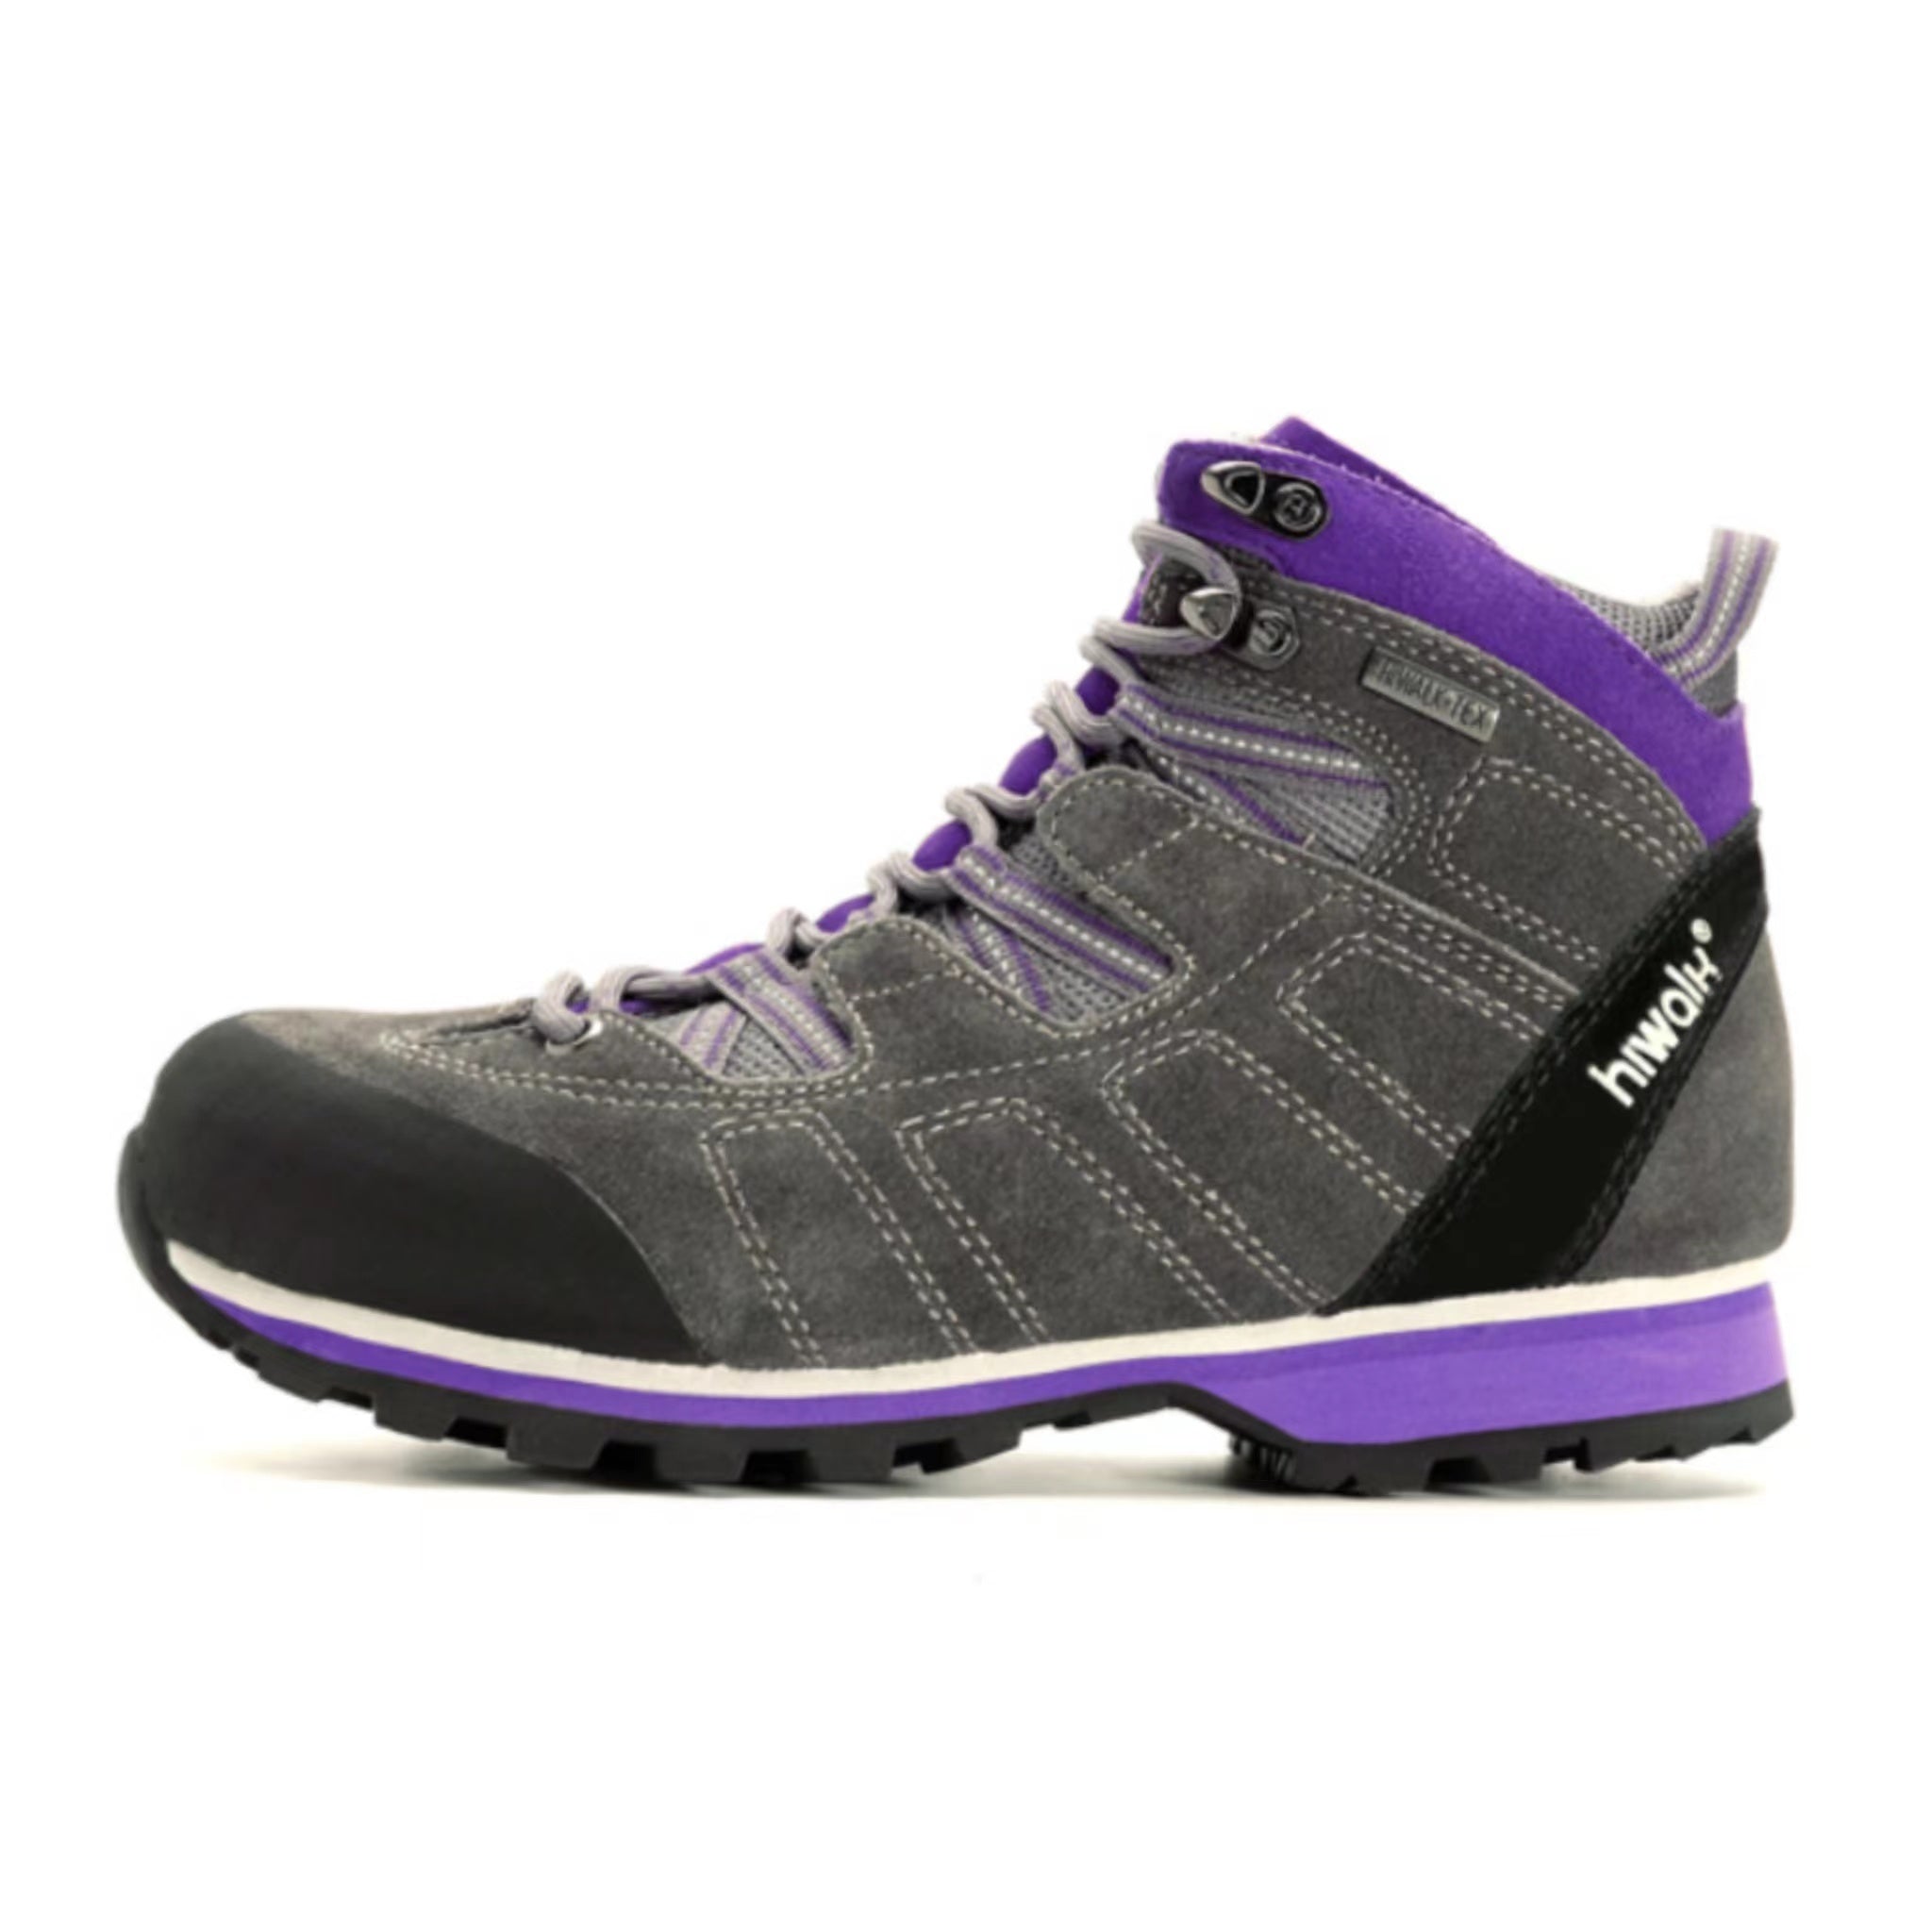 Women's Hiltop Hiking Boots